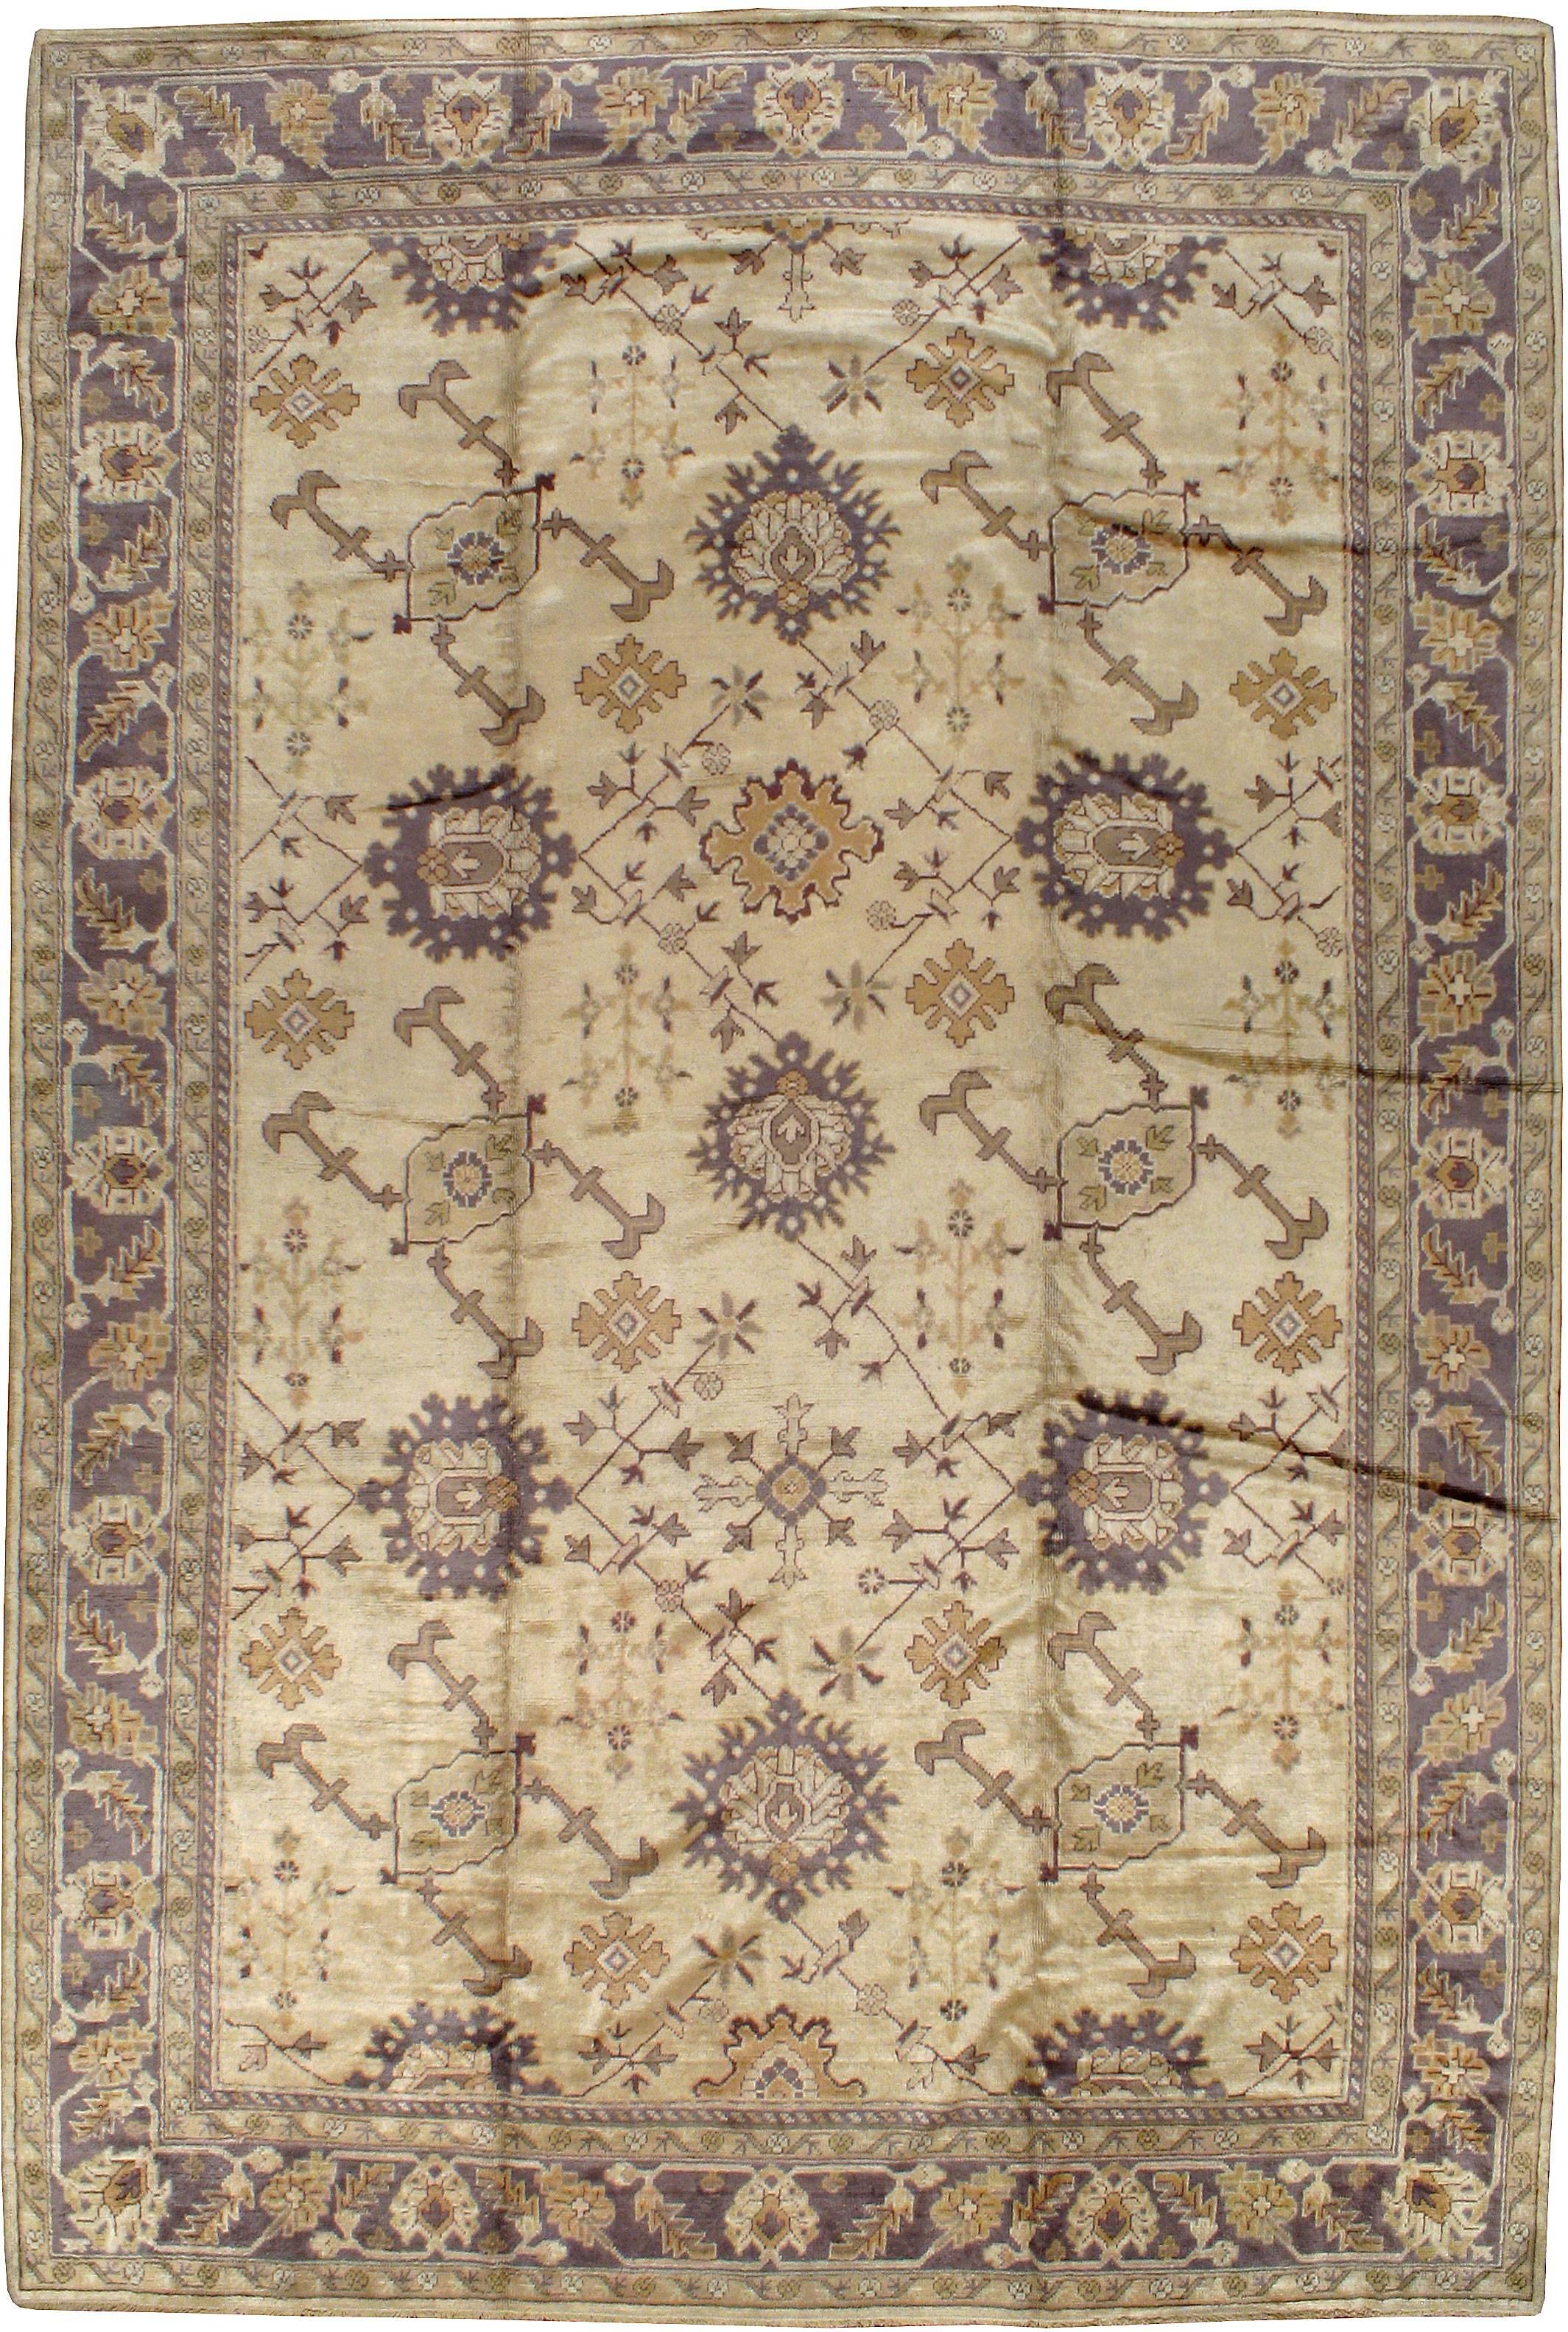 An antique Turkish Oushak carpet from the second quarter of the 20th century.